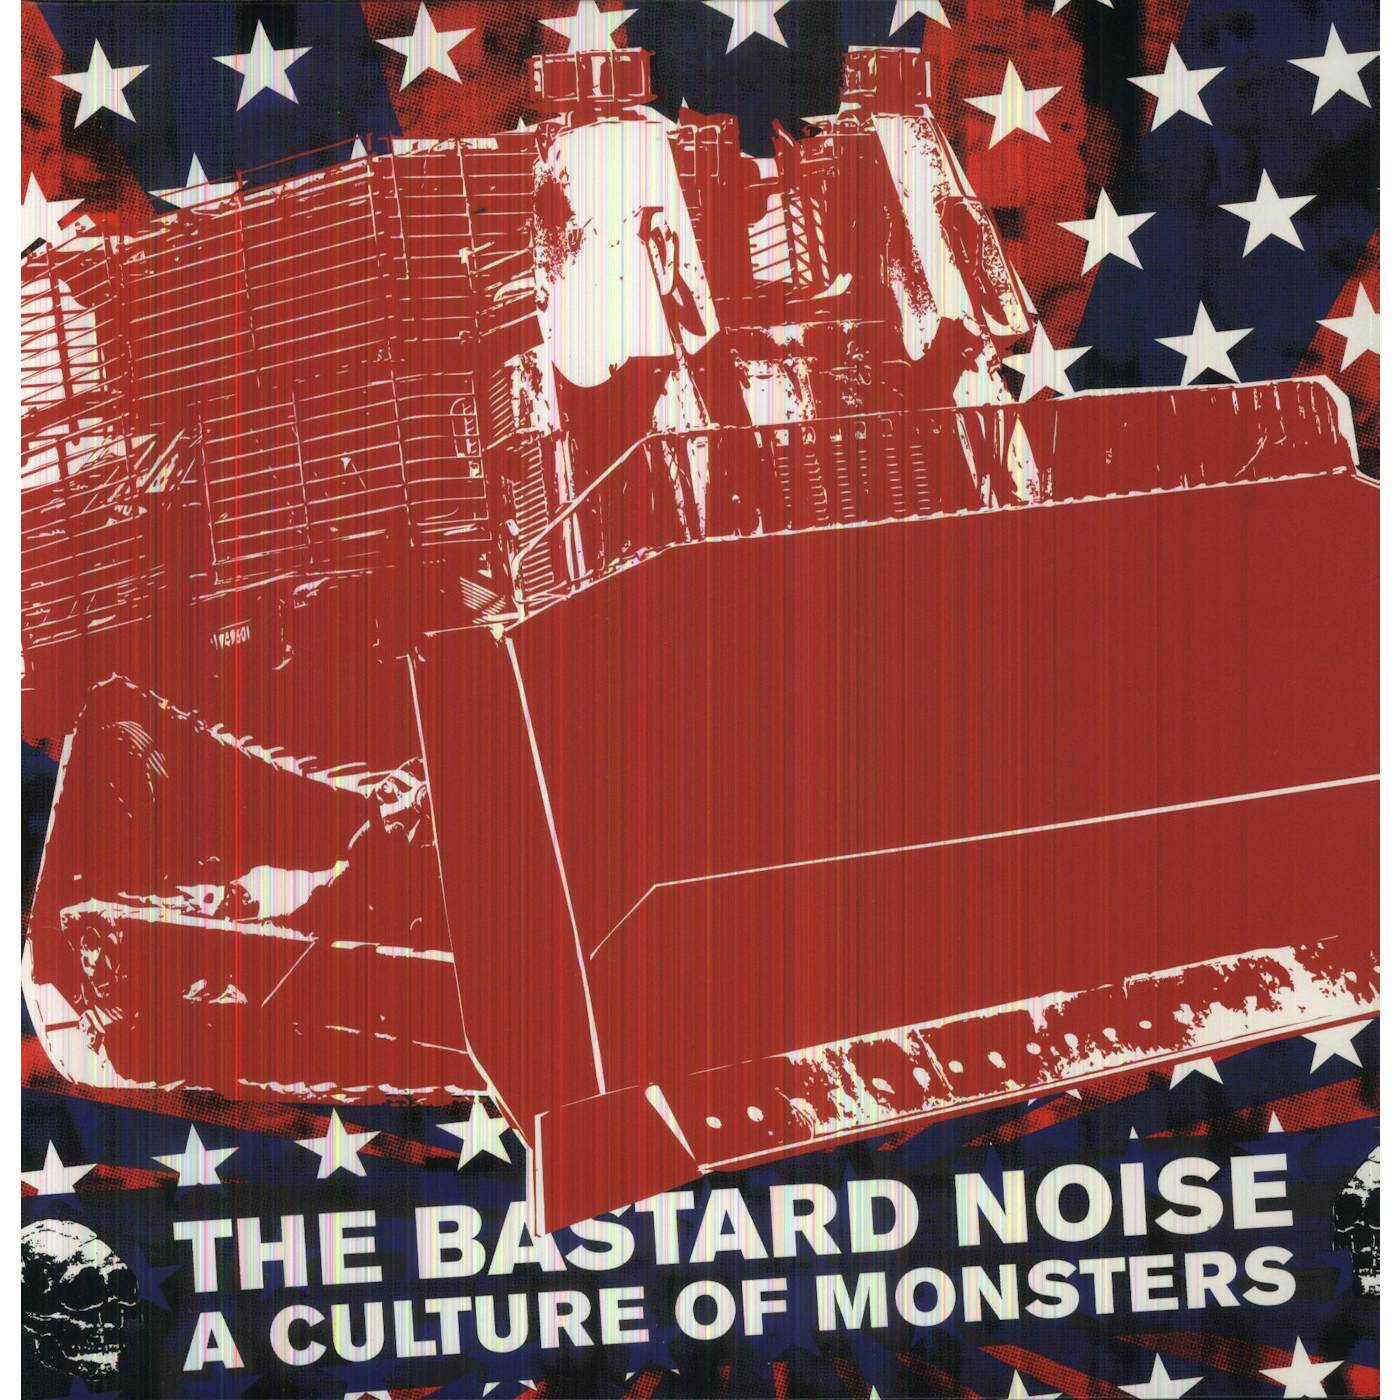 The Bastard Noise CULTURE OF MONSTERS Vinyl Record